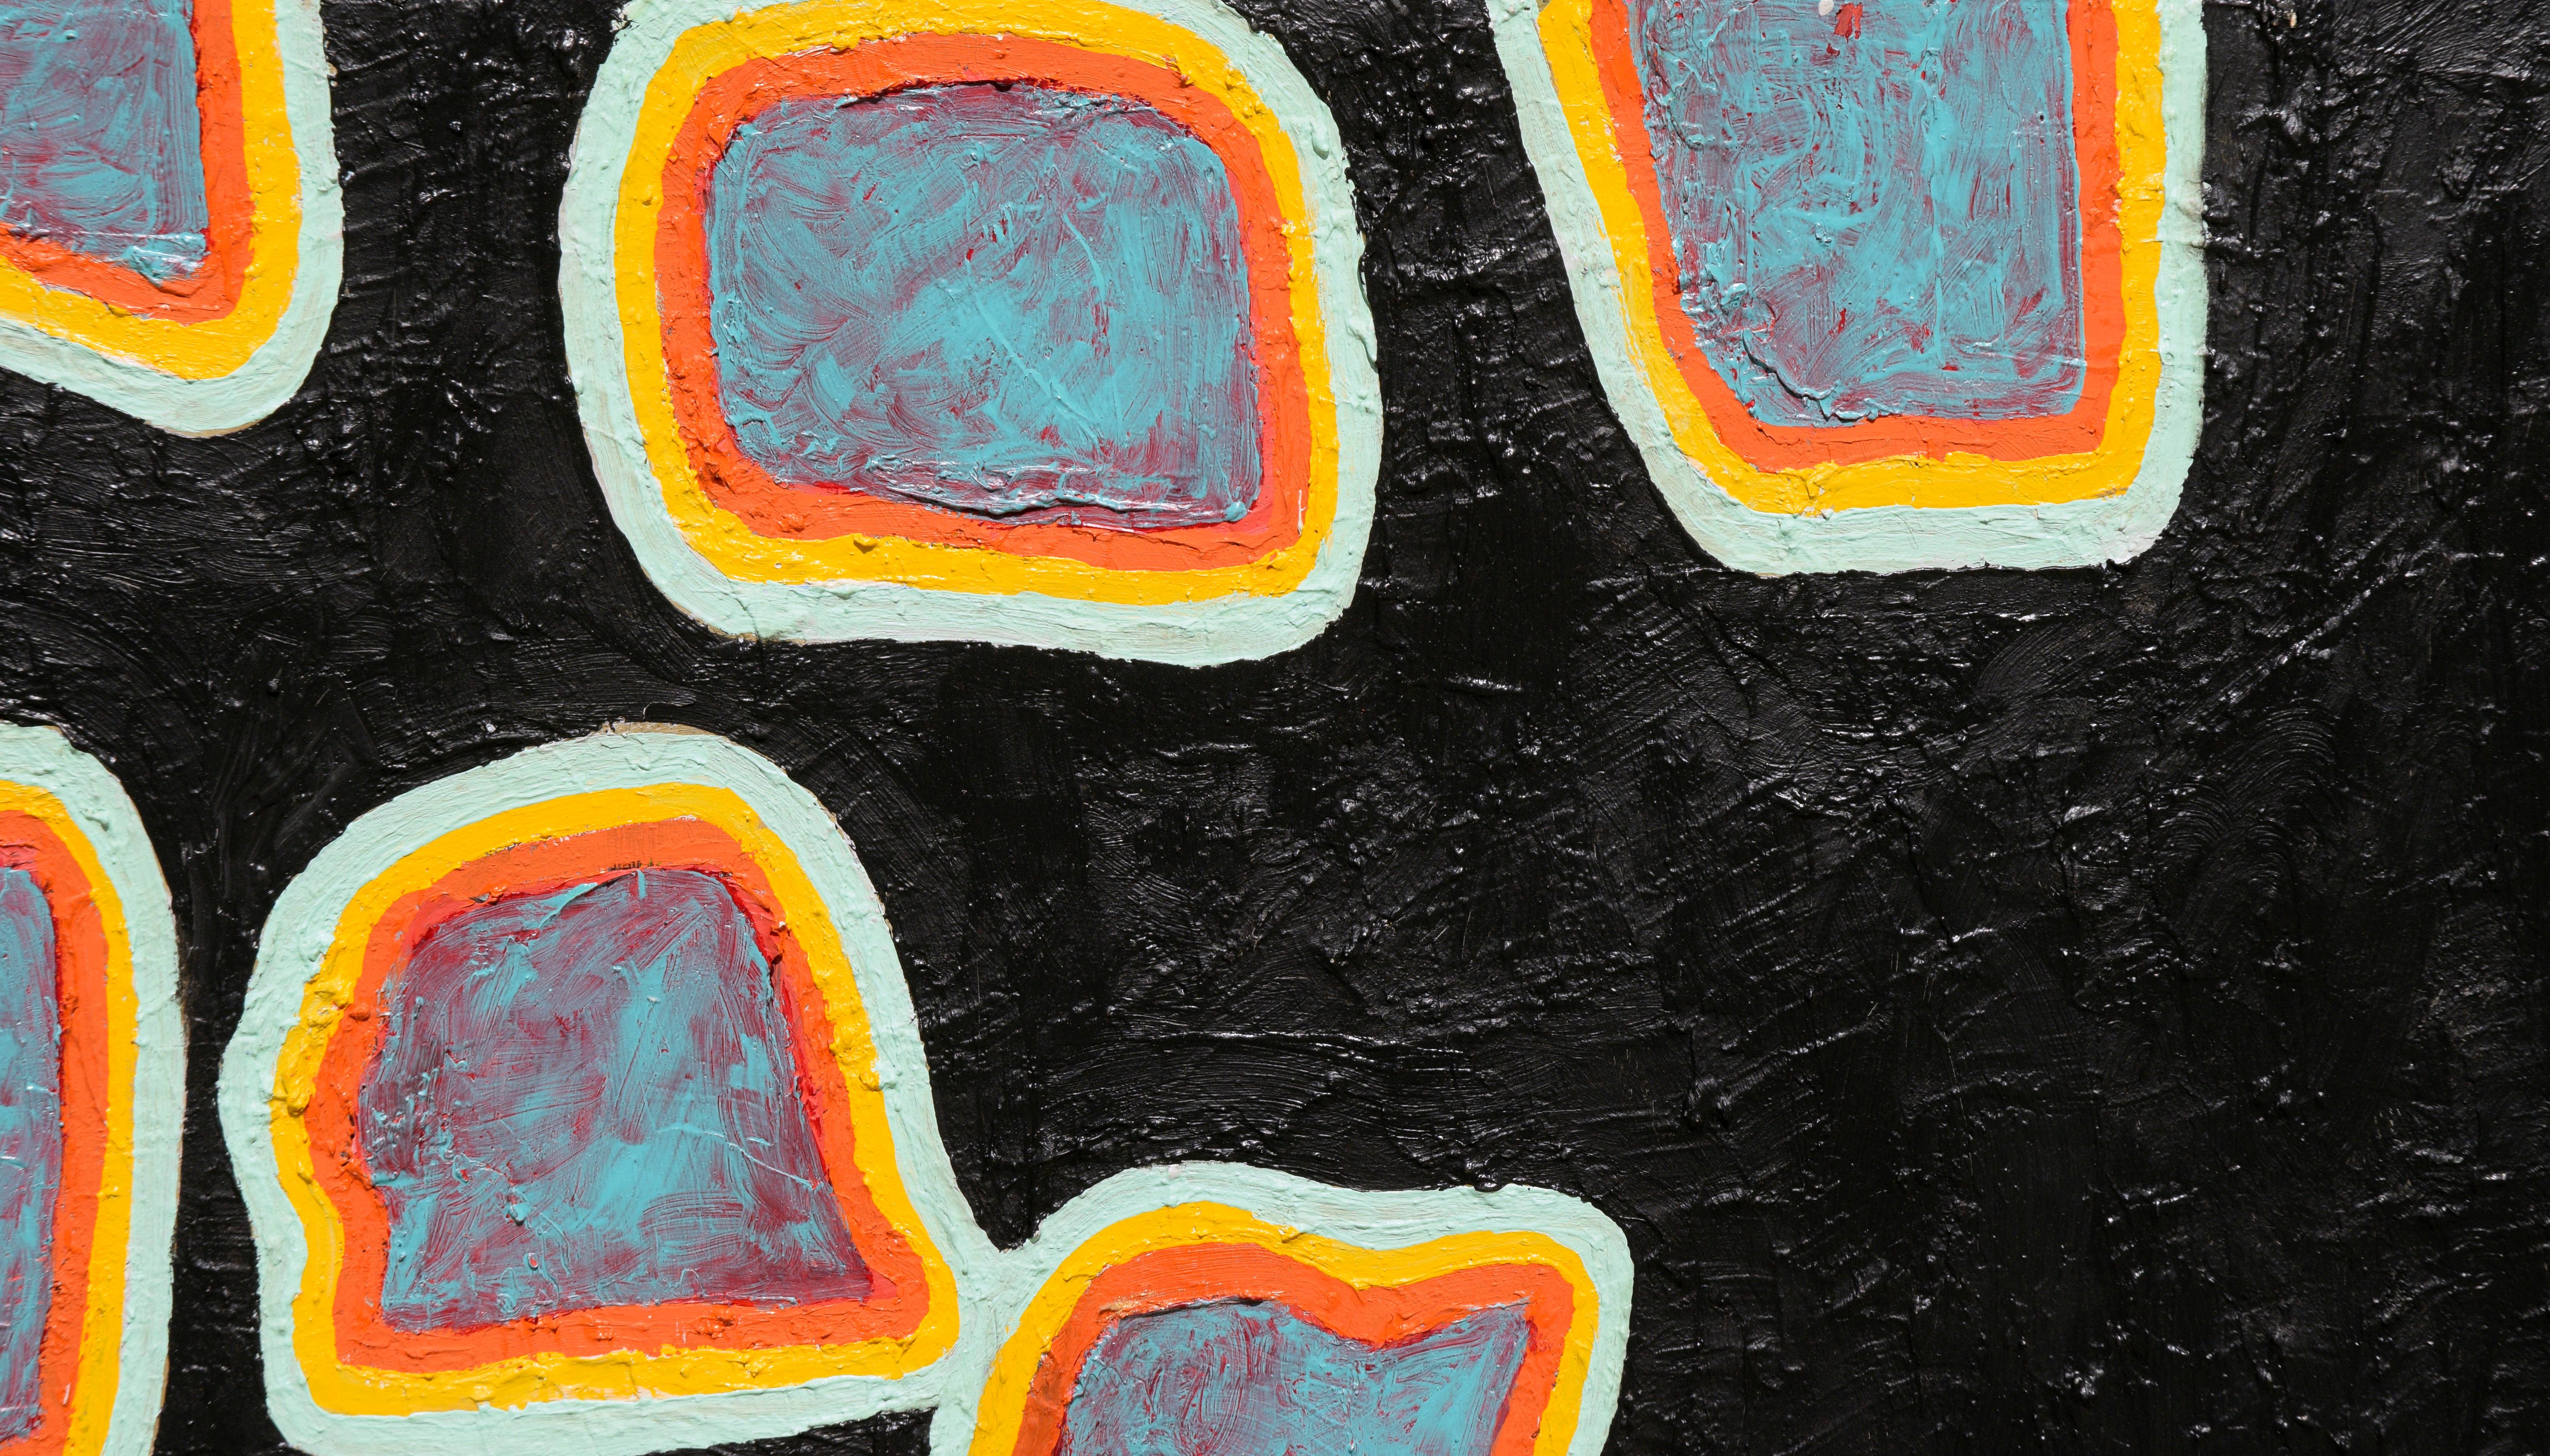 Blue and Orange Shapes on a Black Field - Painting by Michael Pauker 